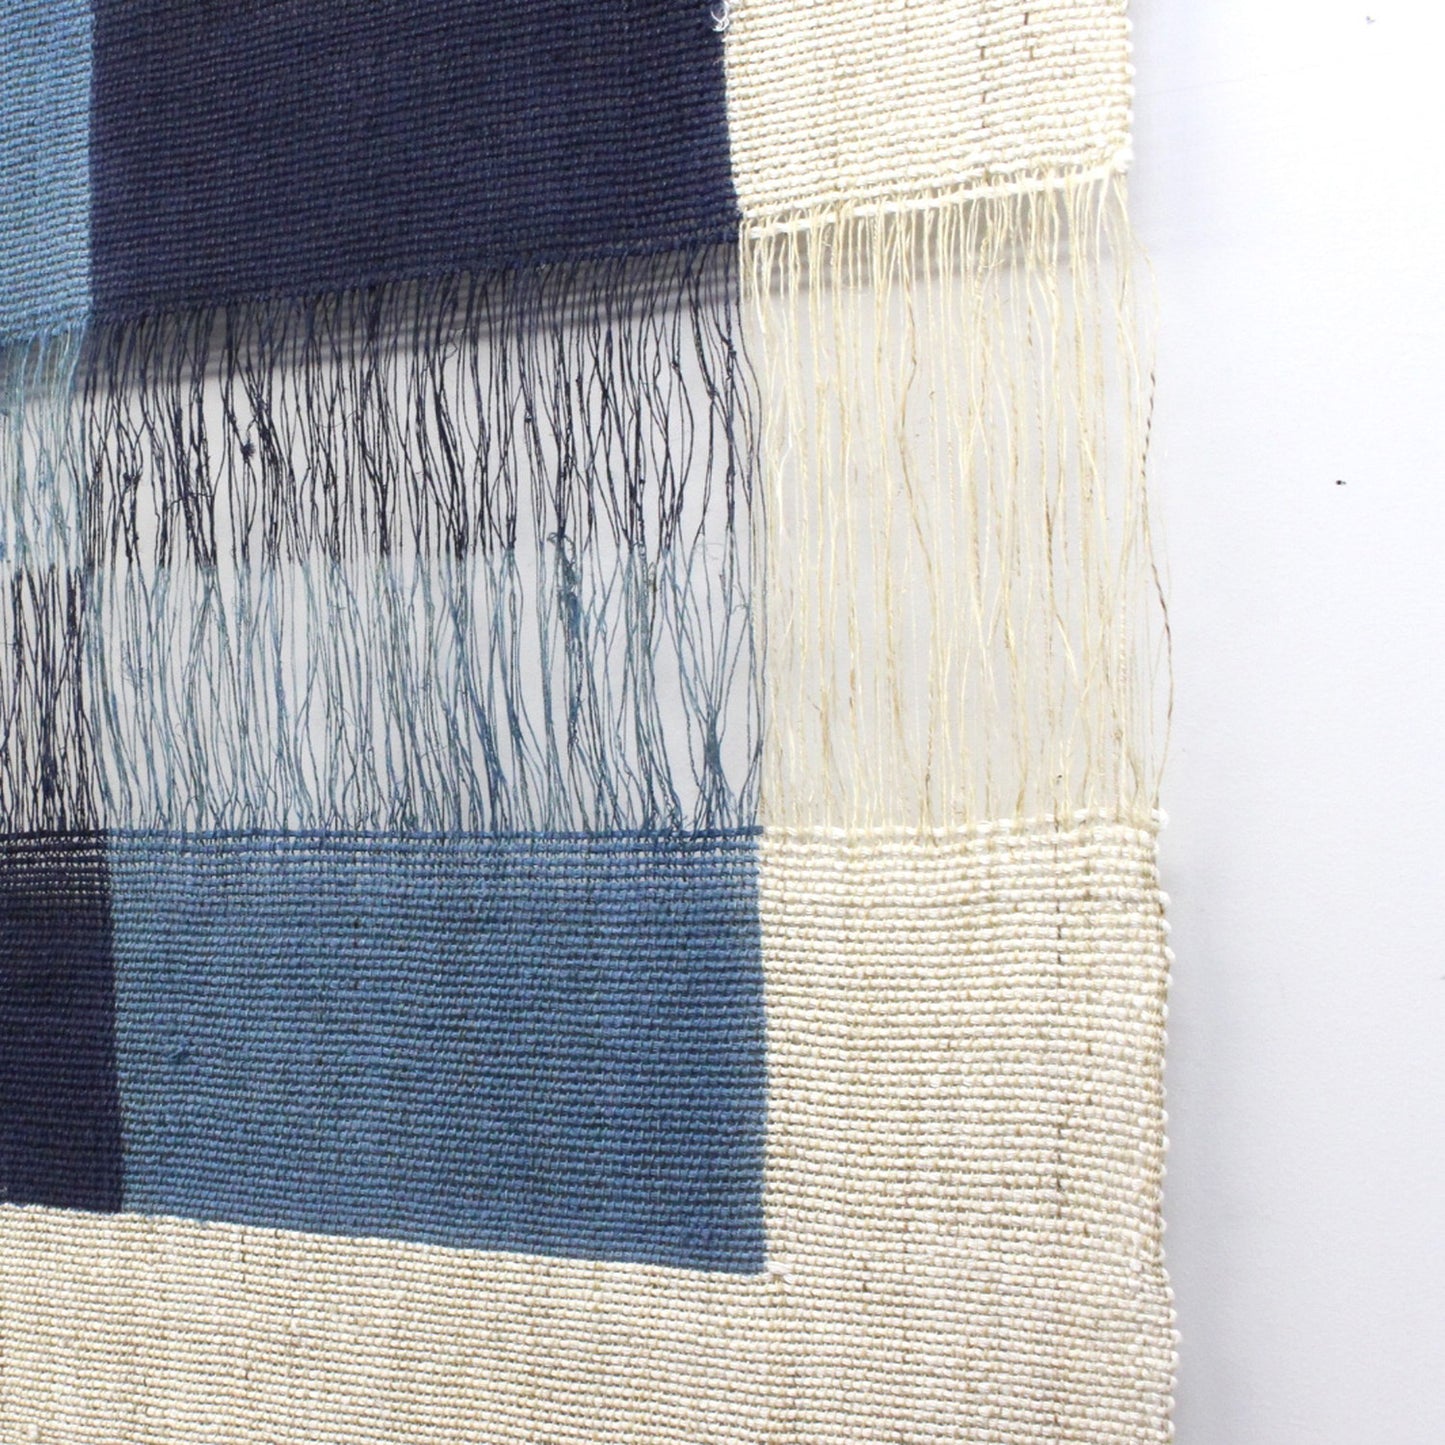 Tapestry / Ramie / Loosely-woven / Duet / Indigo/ W60xH55cm